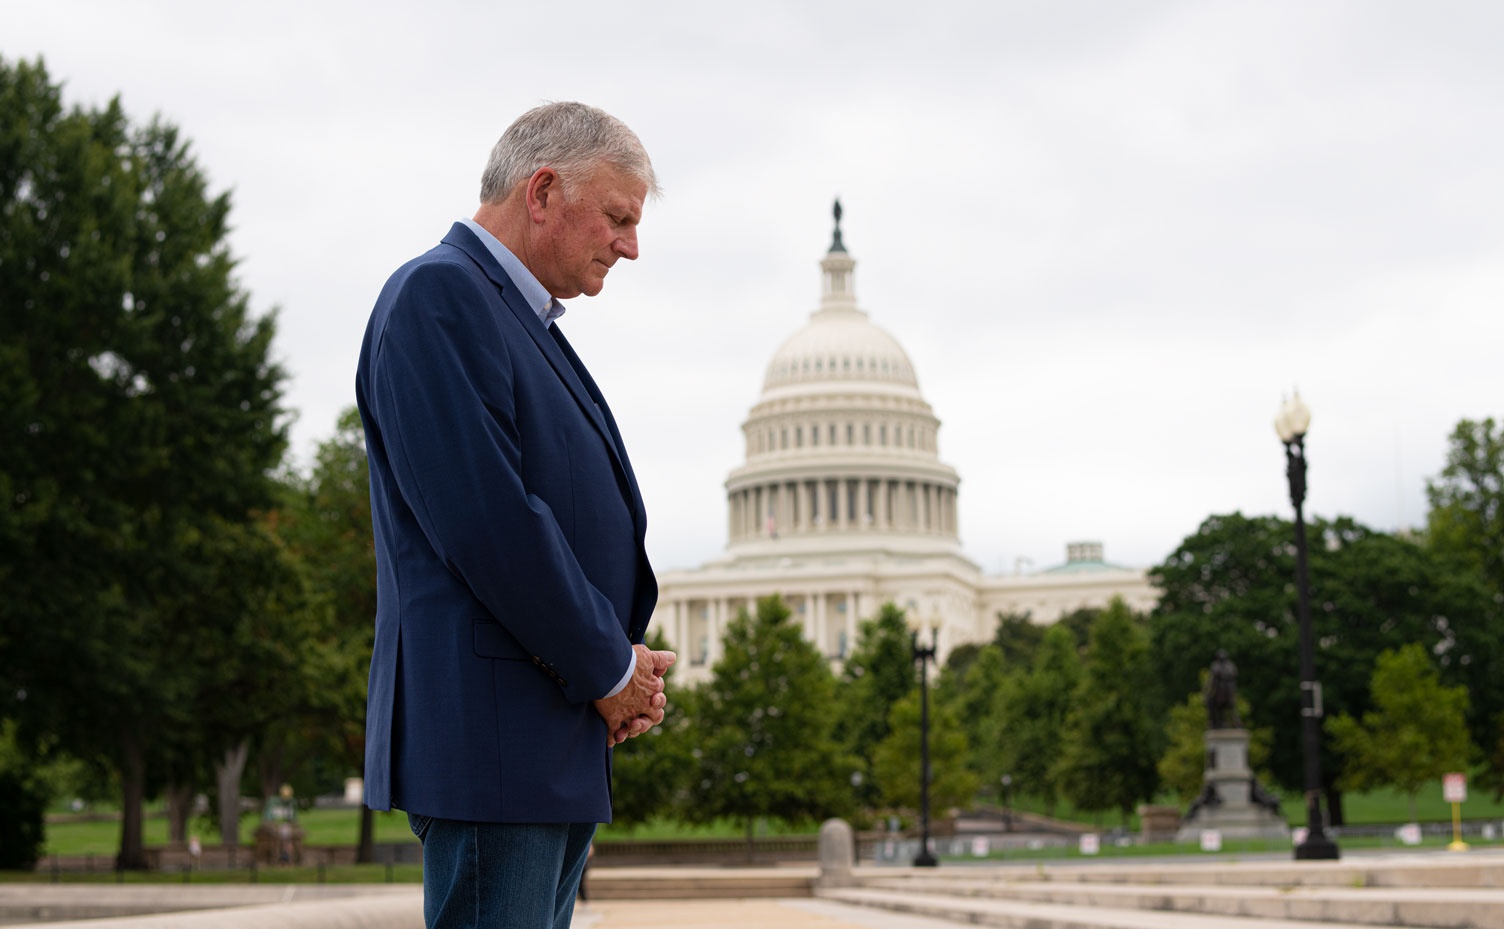 Billy Graham’s son Franklin is calling for prayer against the Equality Act